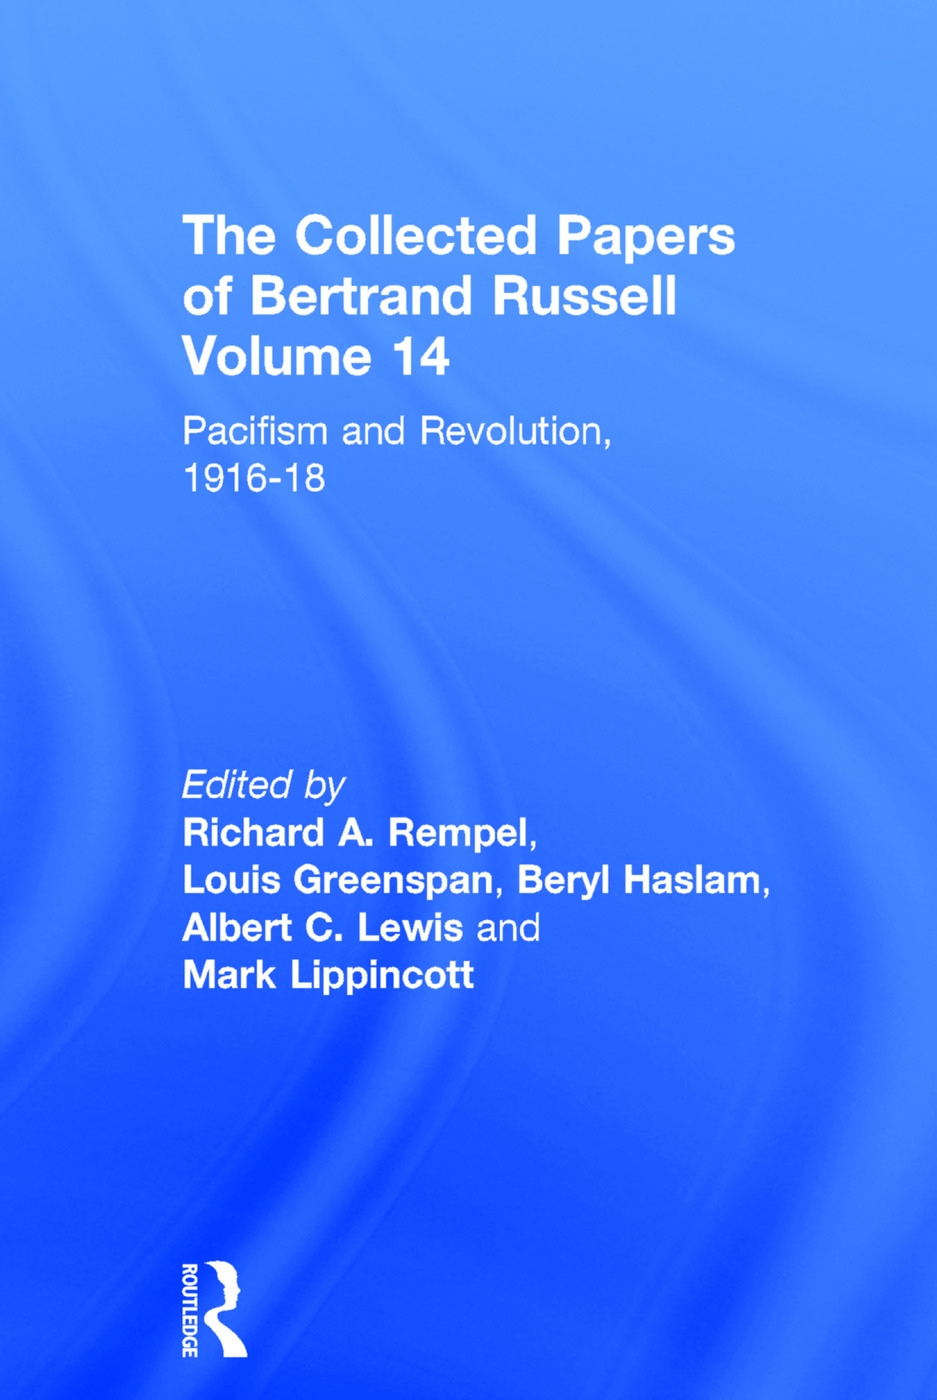 Collected Papers of Bertrand Russell: Pacifism and Revolution, 1916-18